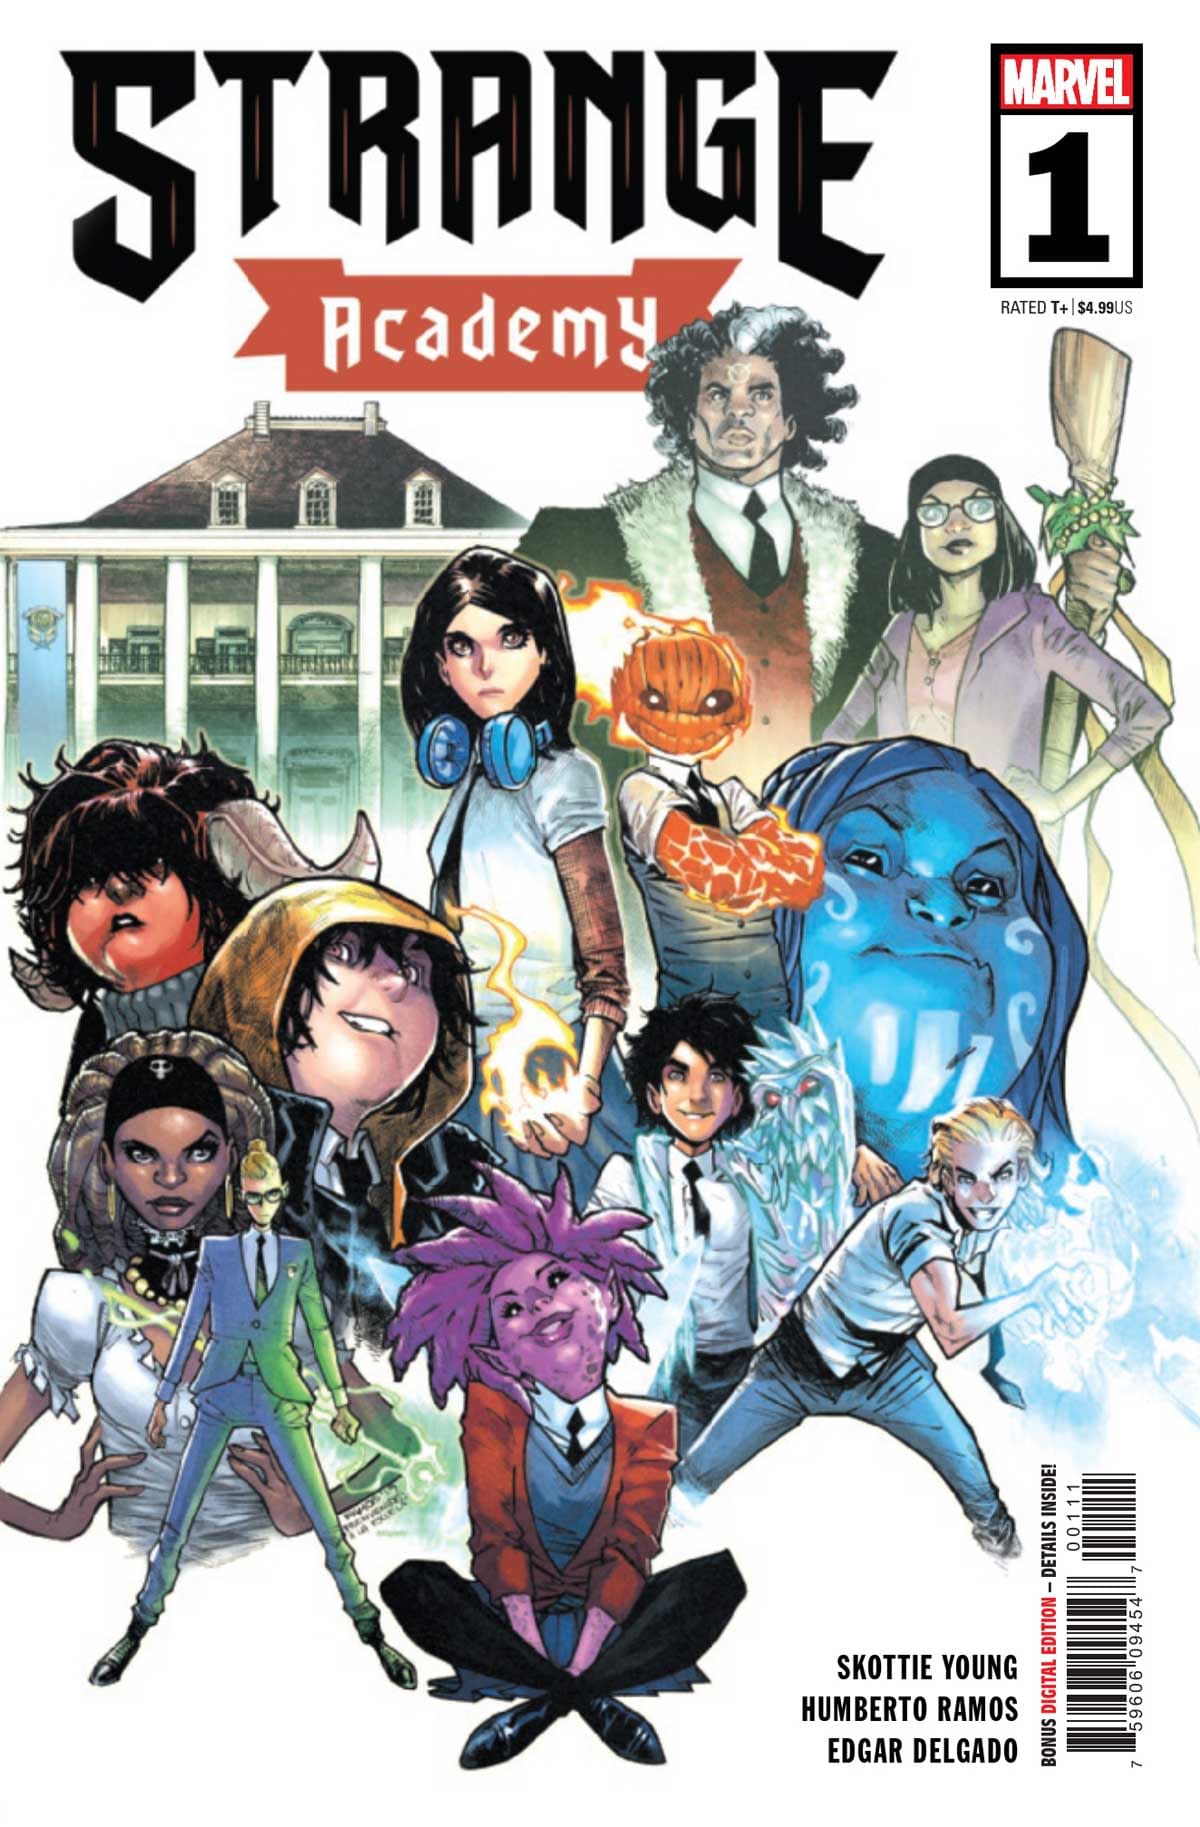 REVIEW: Strange Academy #1 -- "Uniting Scions Of Both 'Good' And 'Bad' Ideologies Under One Educational Roof"